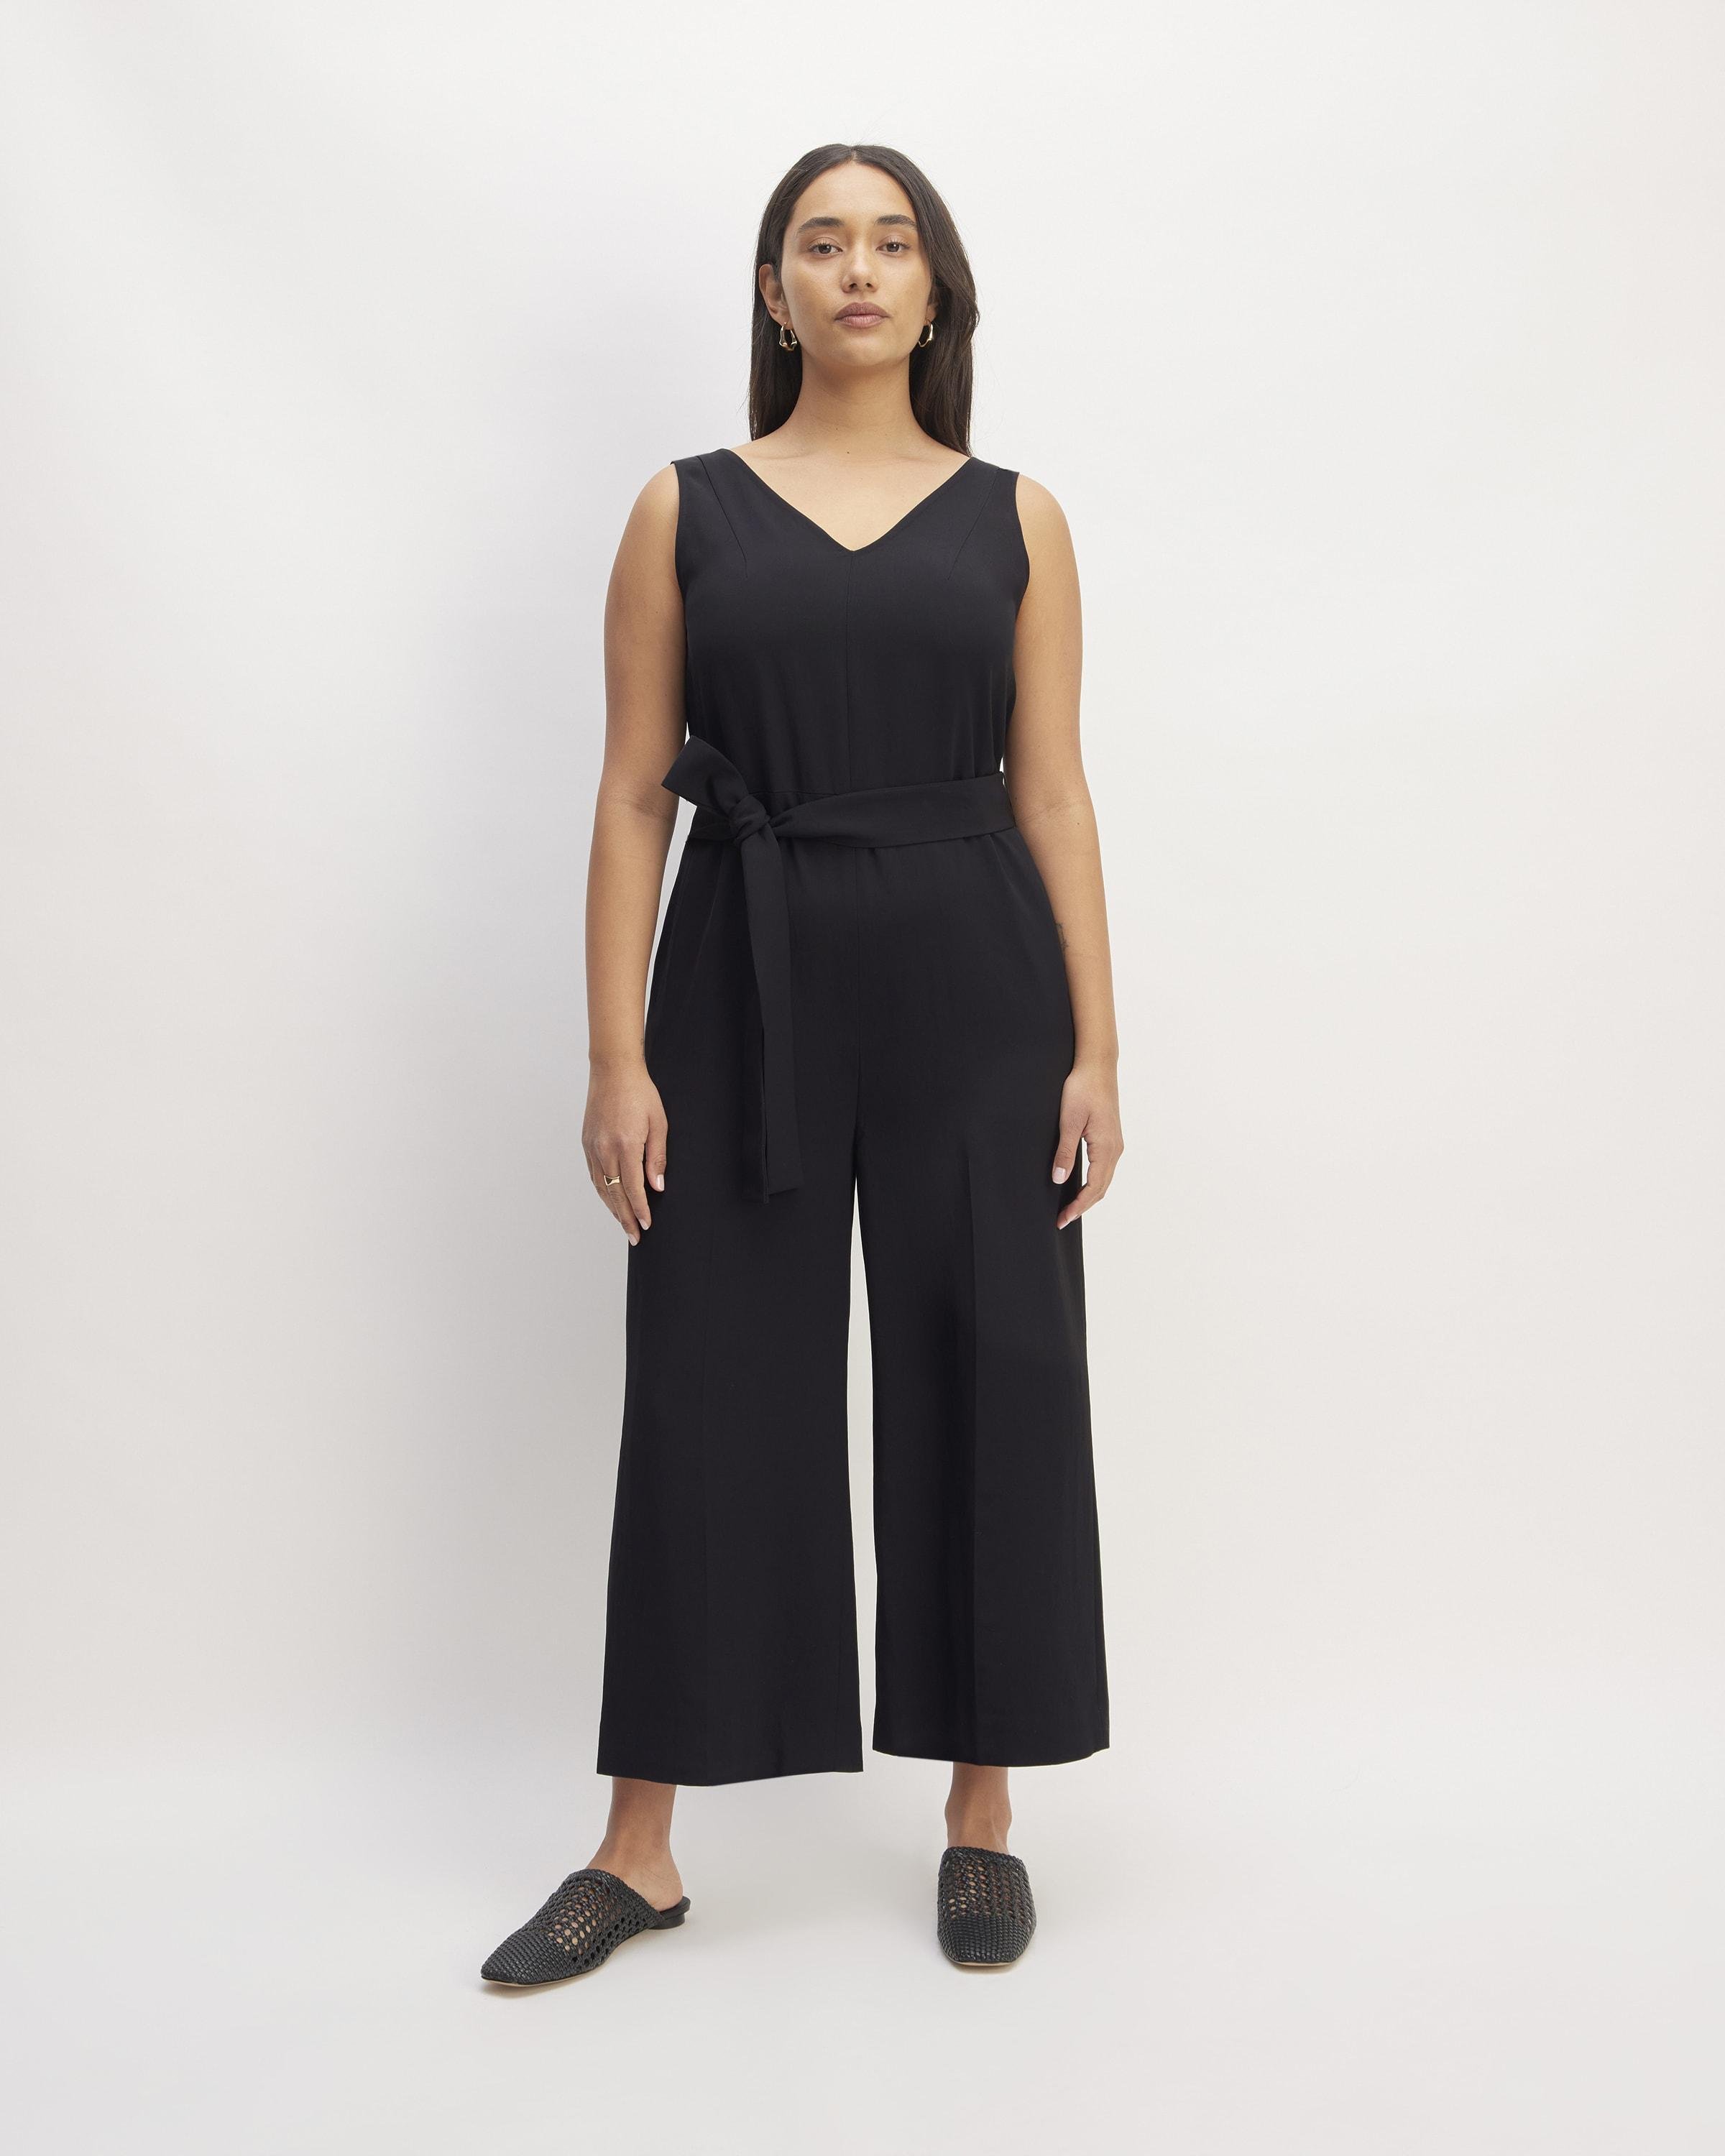 The Triacetate Belted Jumpsuit by EVERLANE